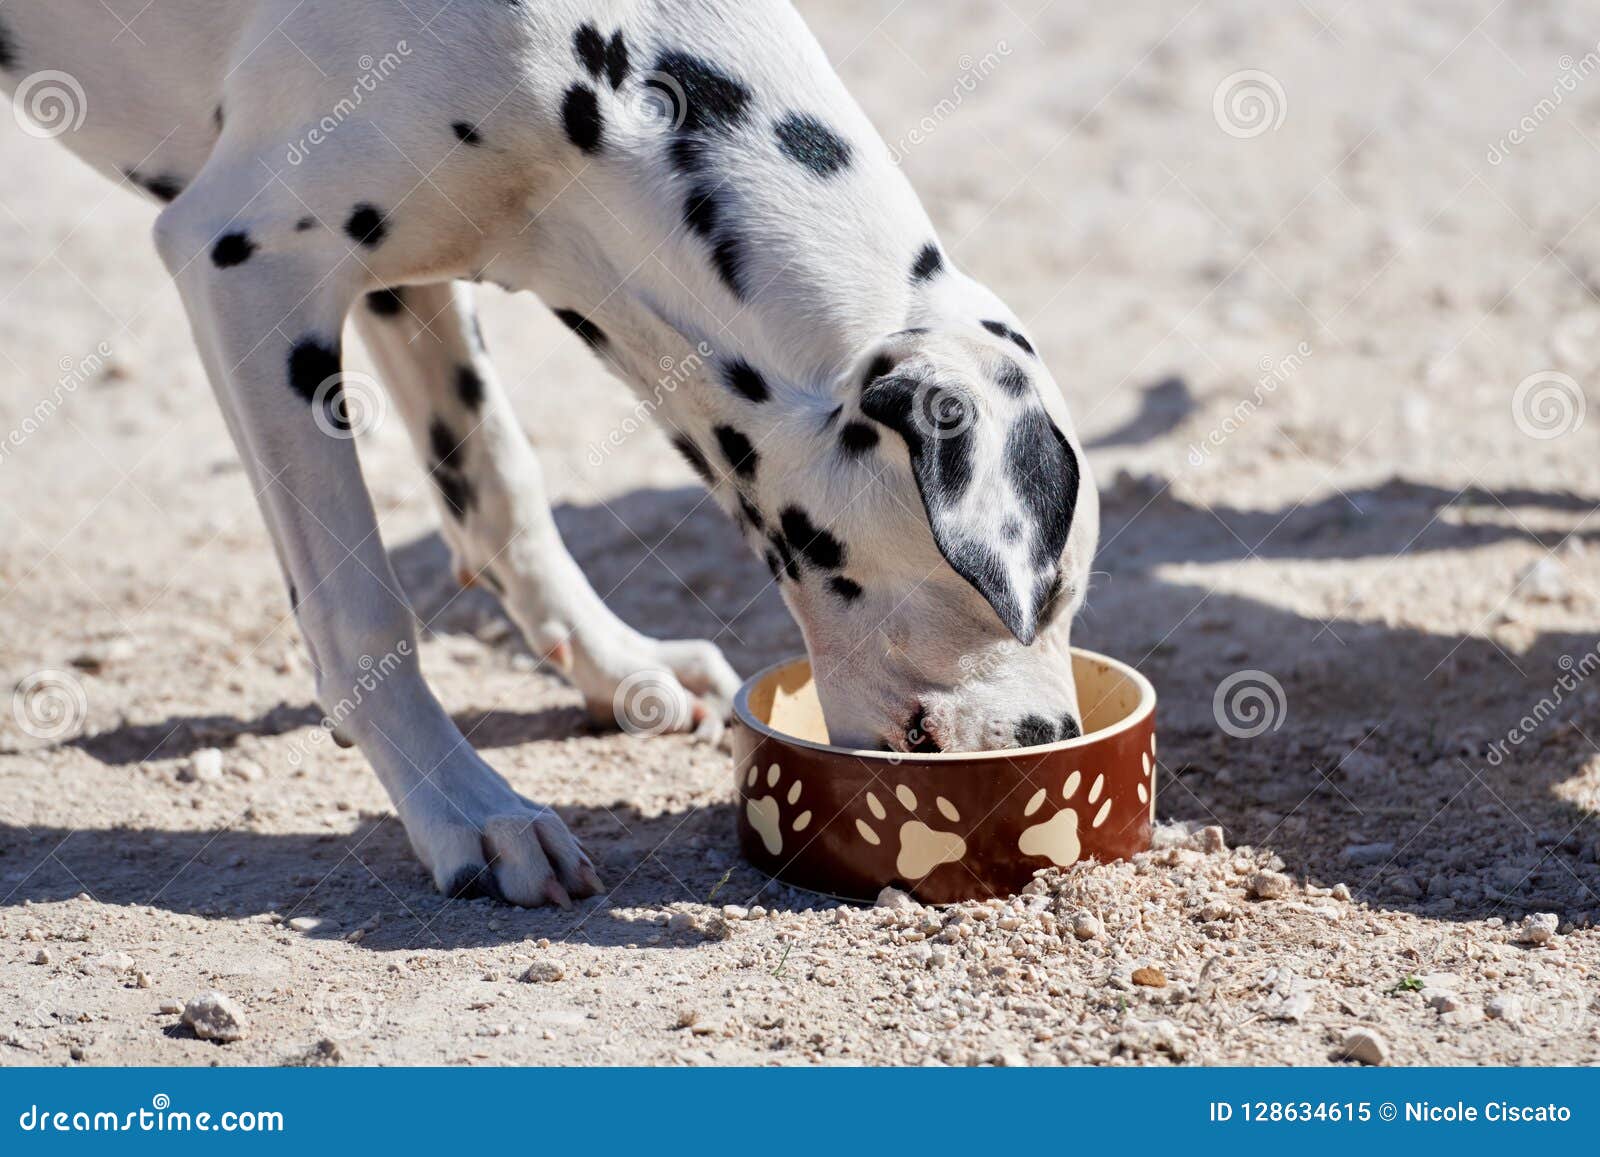 Dalmatian Puppy Eats Dry Food From A Bowl Stock Image